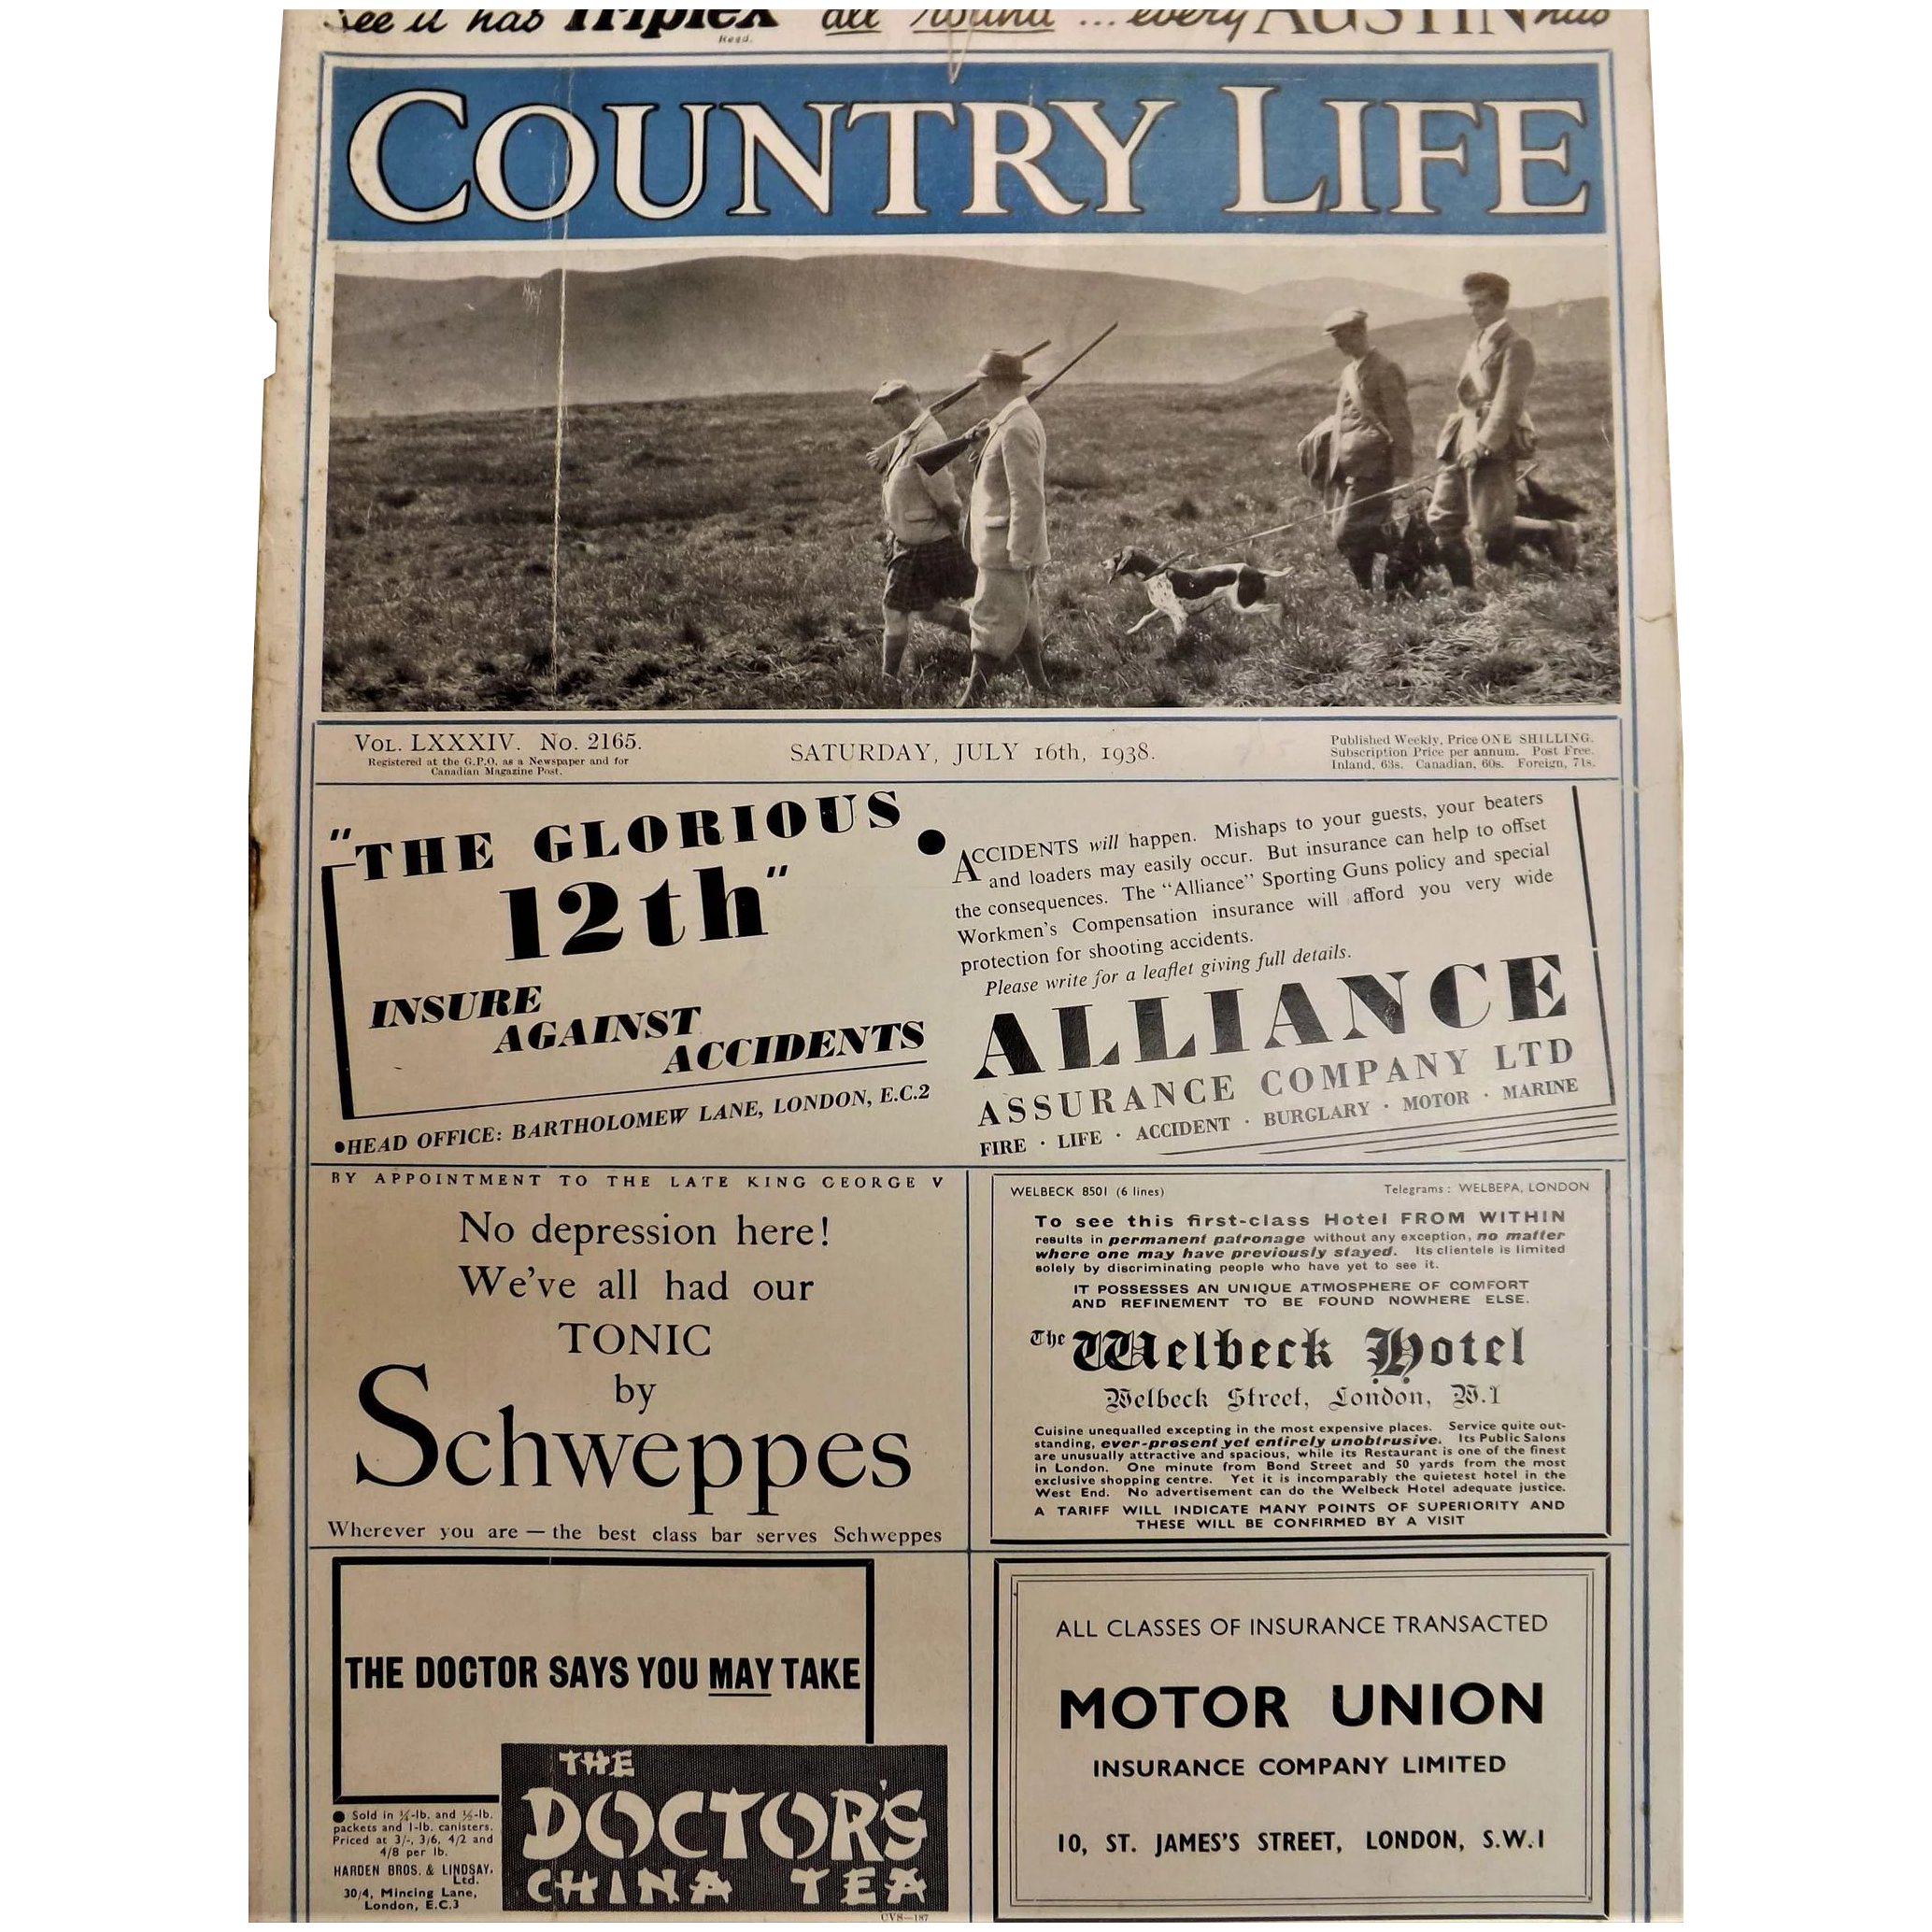 Country Life Magazine Saturday July 16th 1938